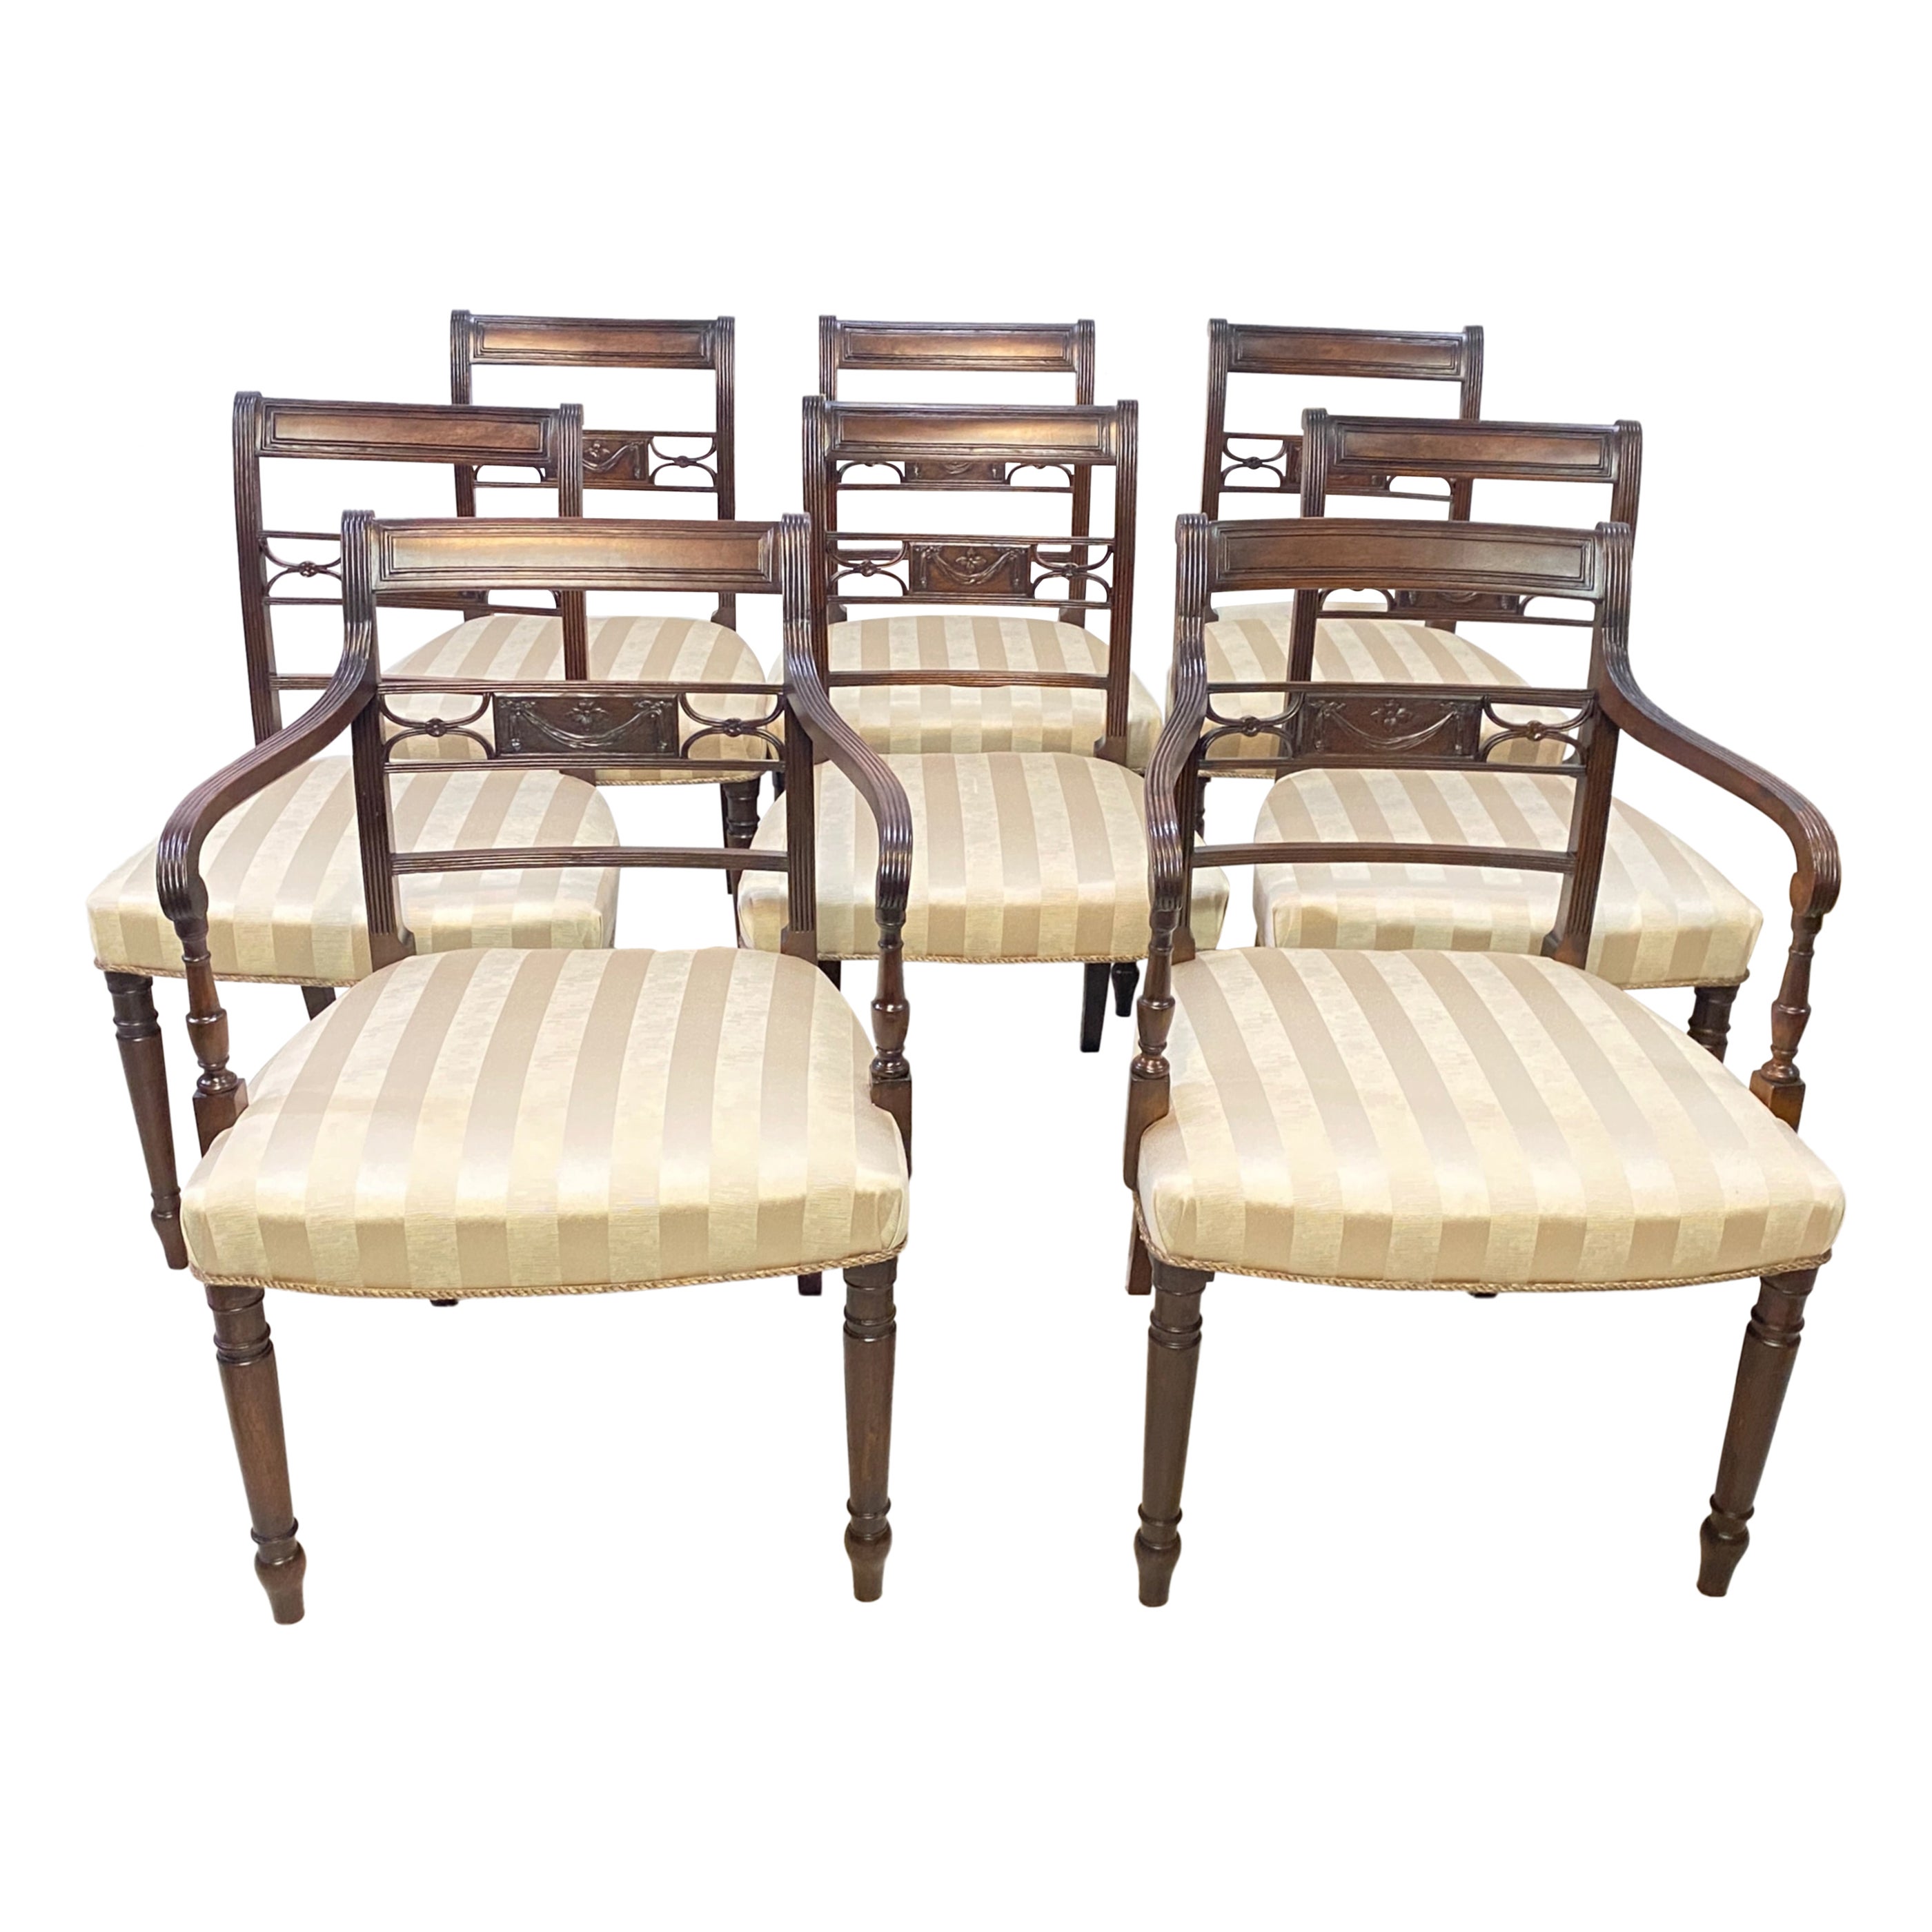 Set of 8 English George III Mahogany Dining Chairs, Early 19th Century